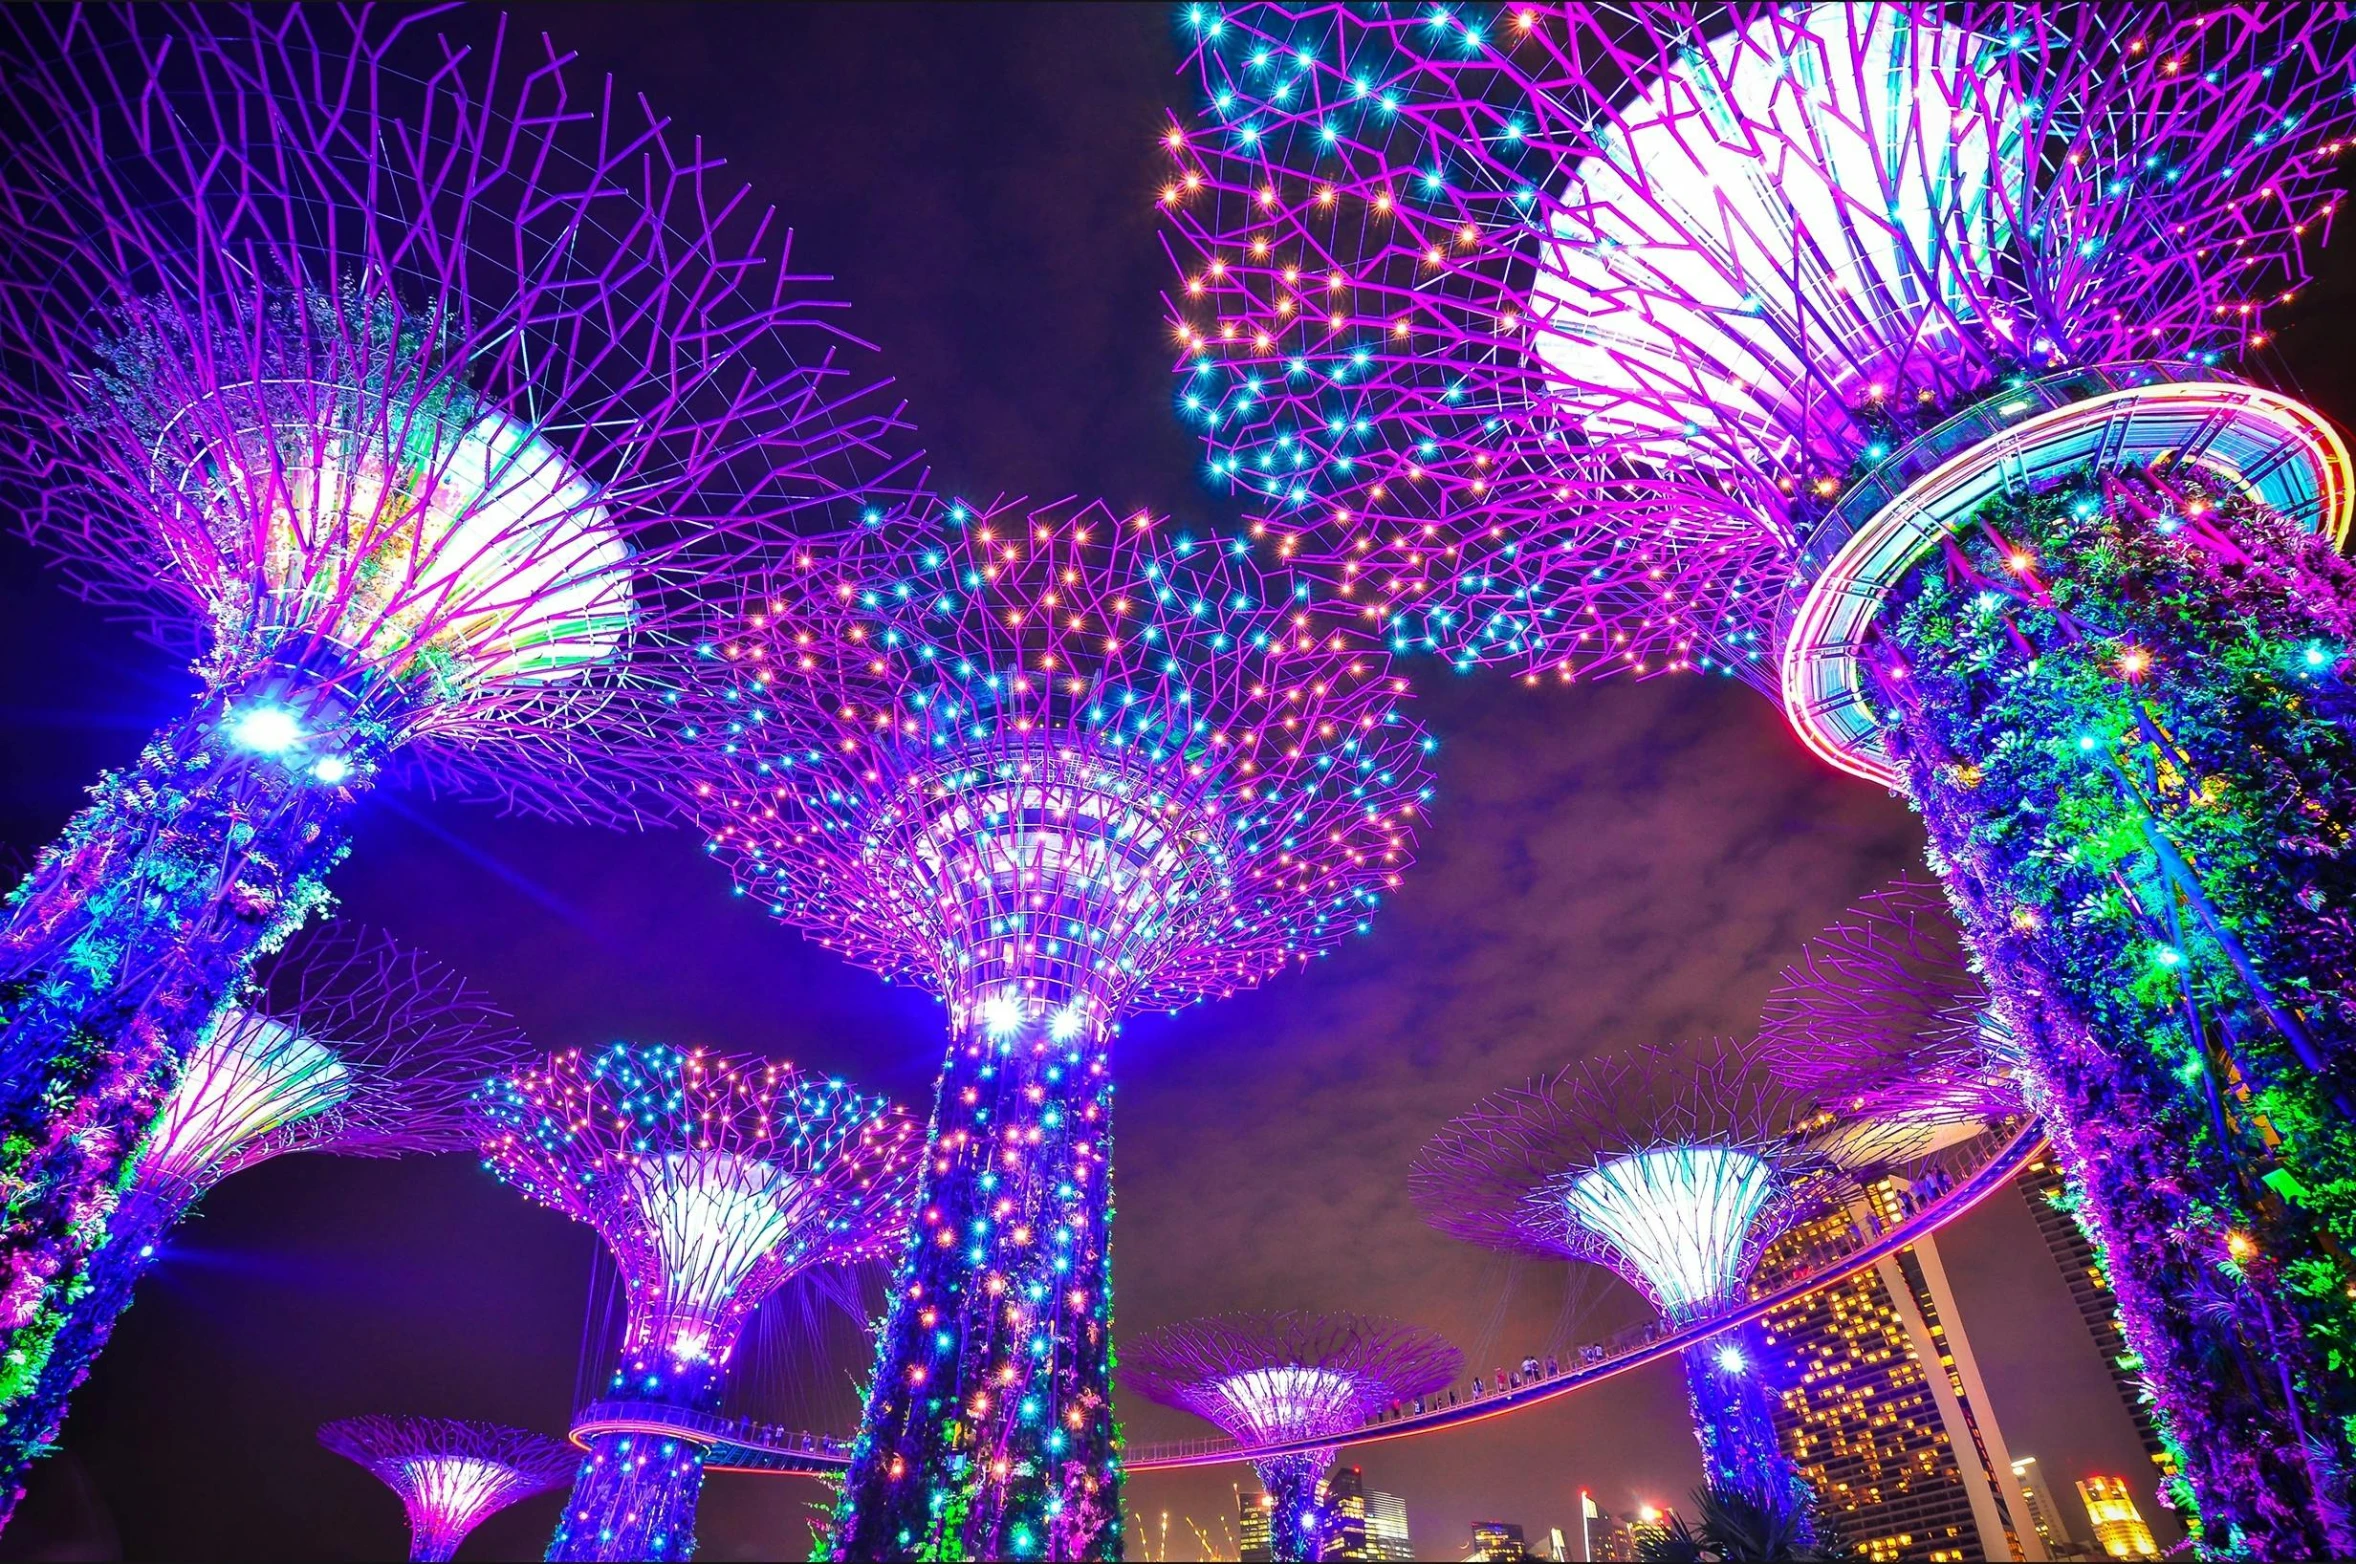 a group of trees that are lit up at night, inspired by Bruce Munro, pexels contest winner, interactive art, singapore, avatar image, mushroom structures, vivid colors!